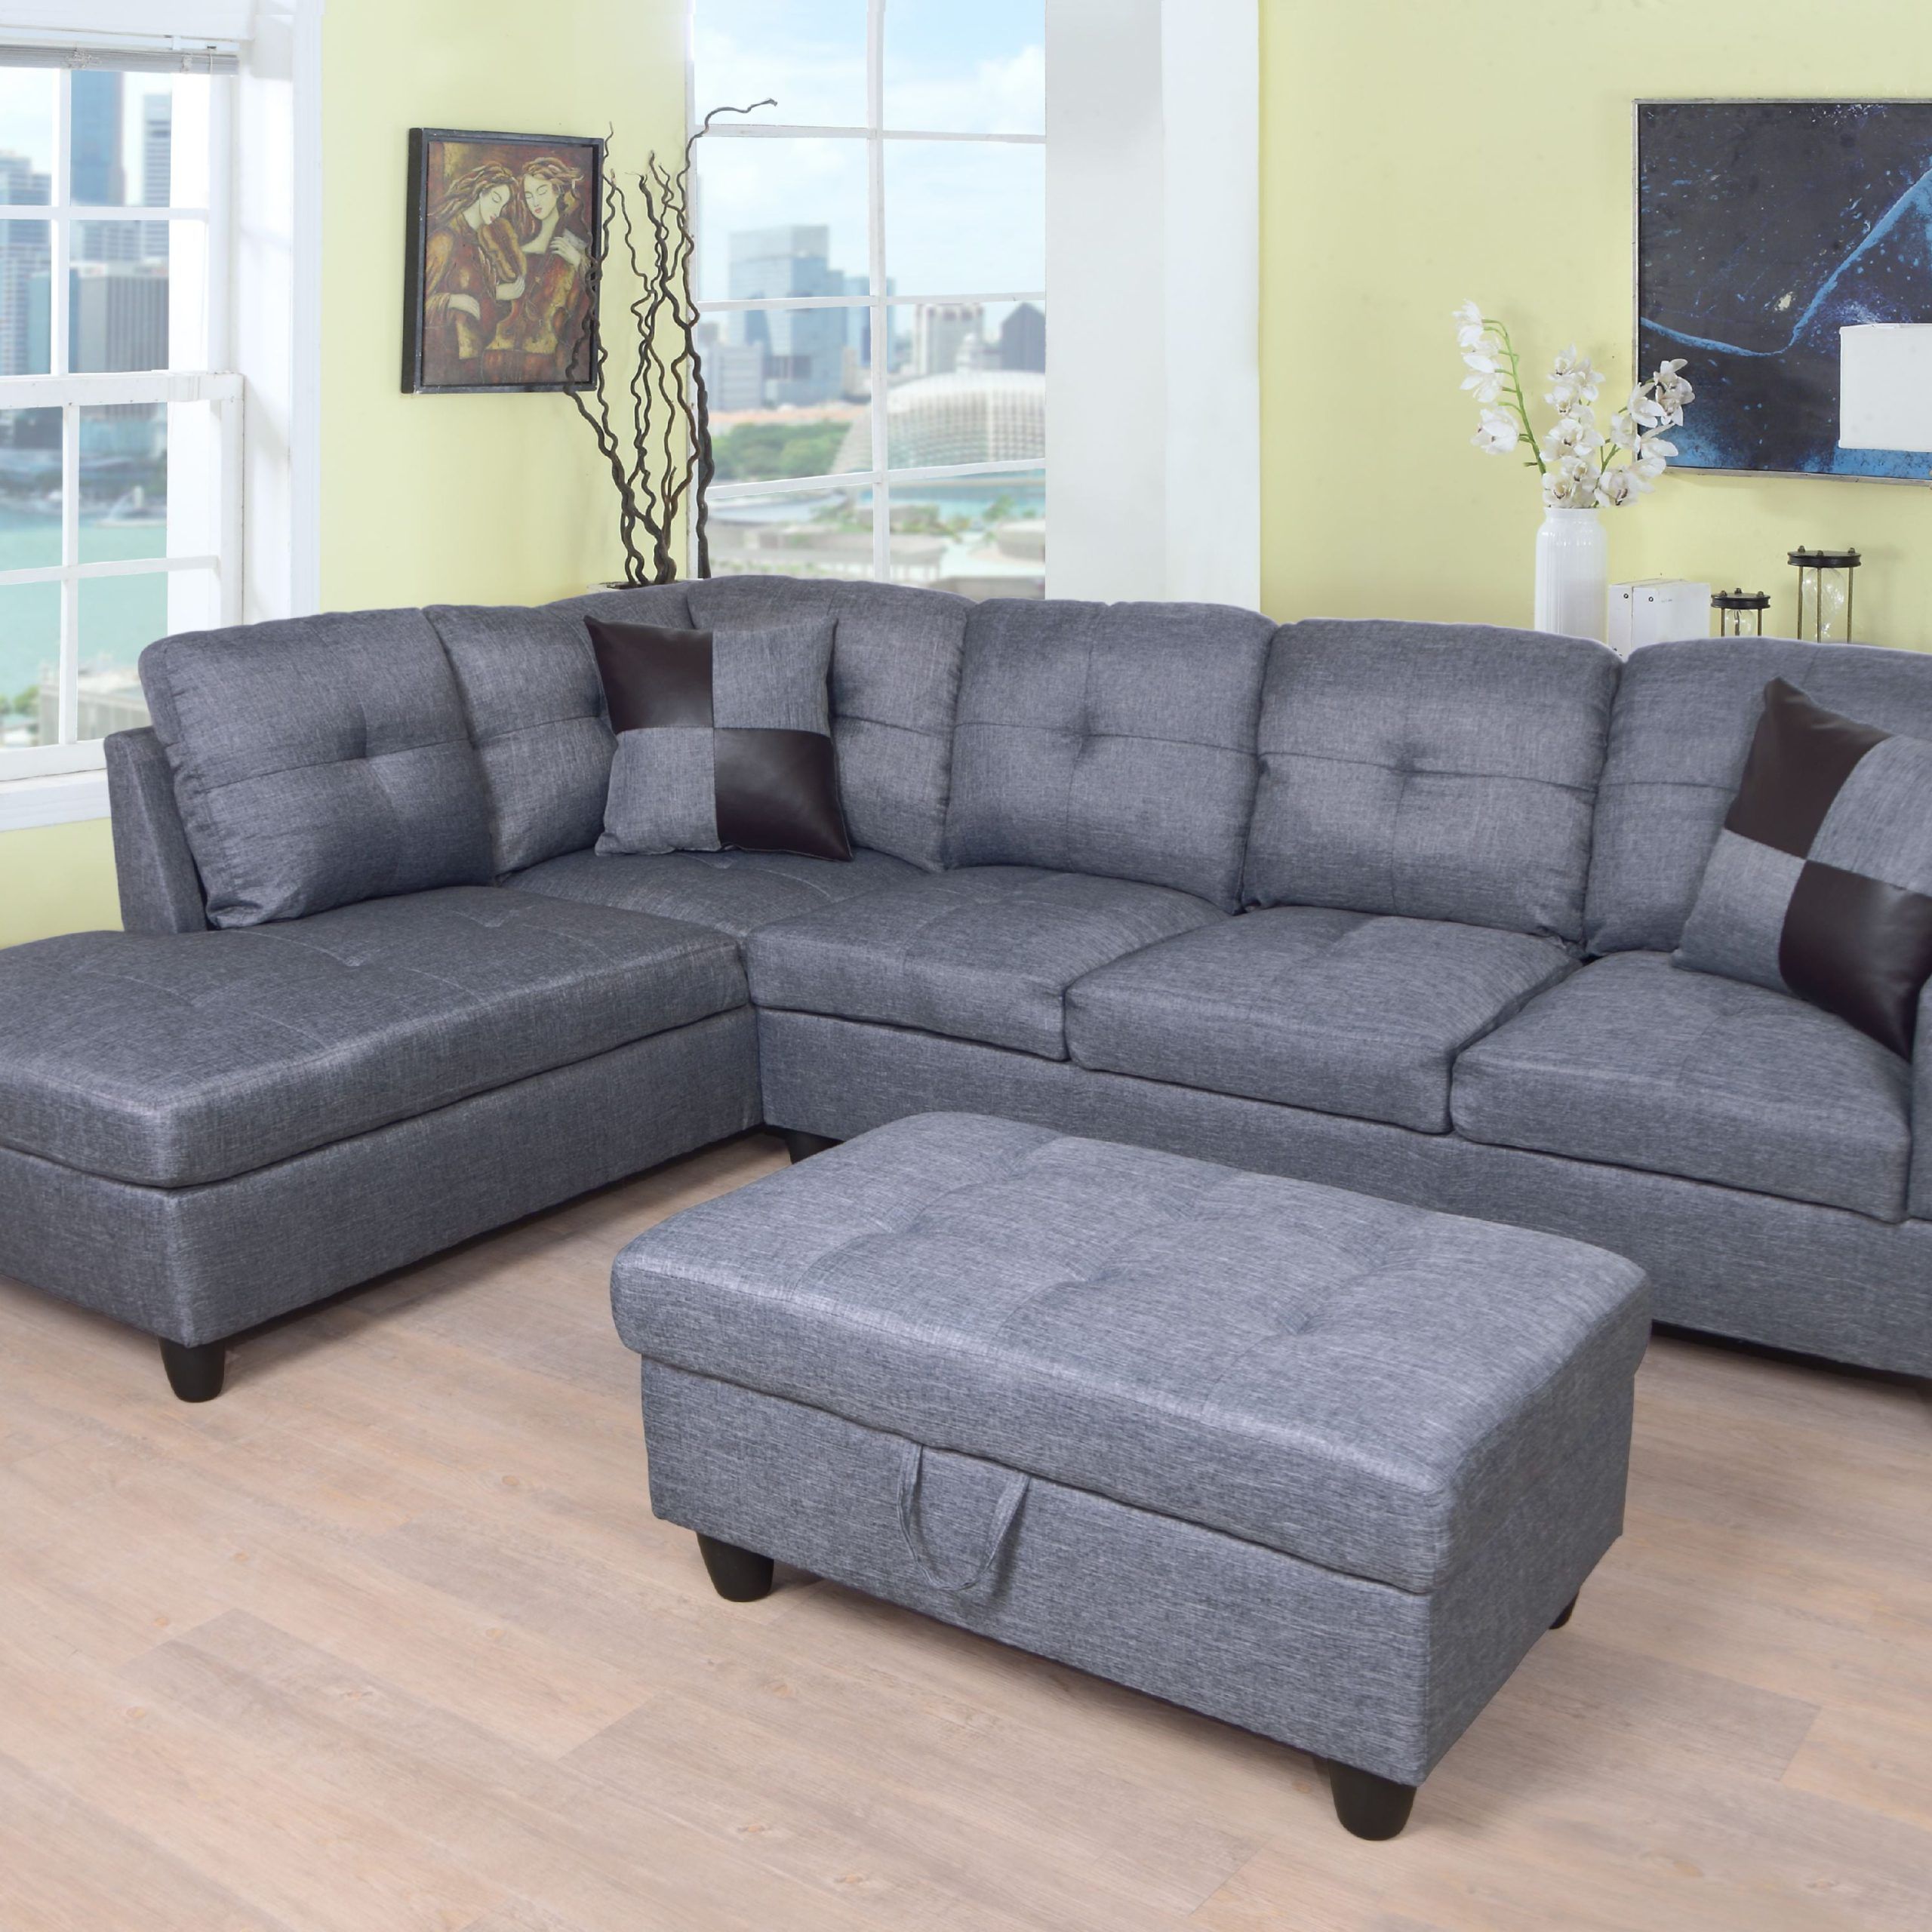 Sam Left Facing Sectional Sofa With Ottoman, Grey – Walmart Inside Sofas With Ottomans (View 6 of 20)